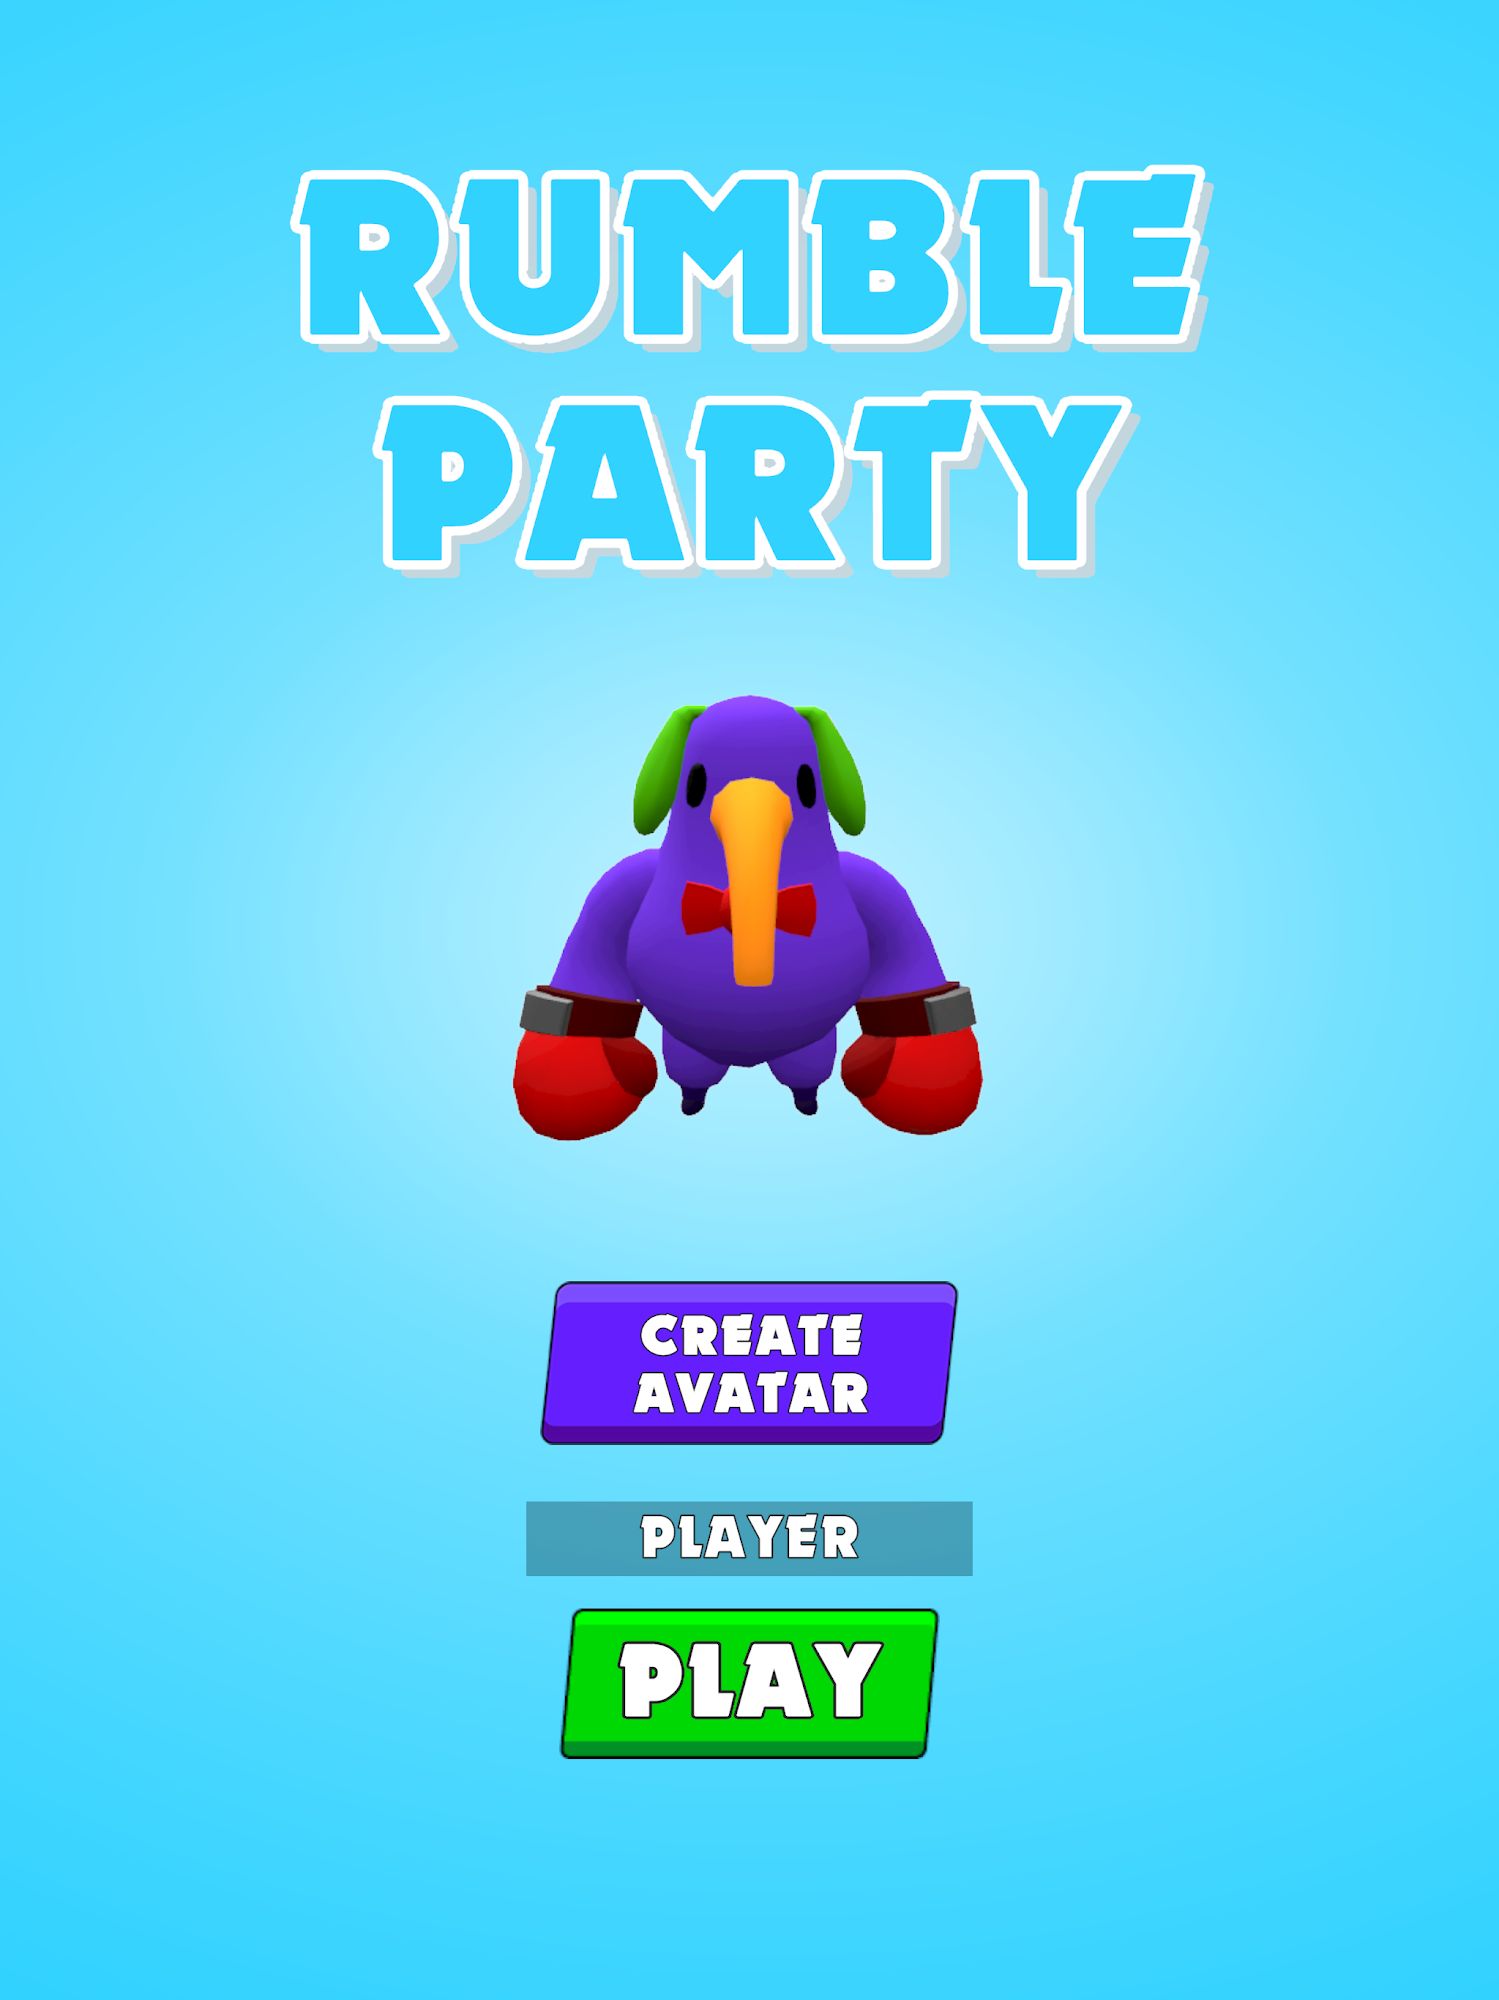 Rumble Party